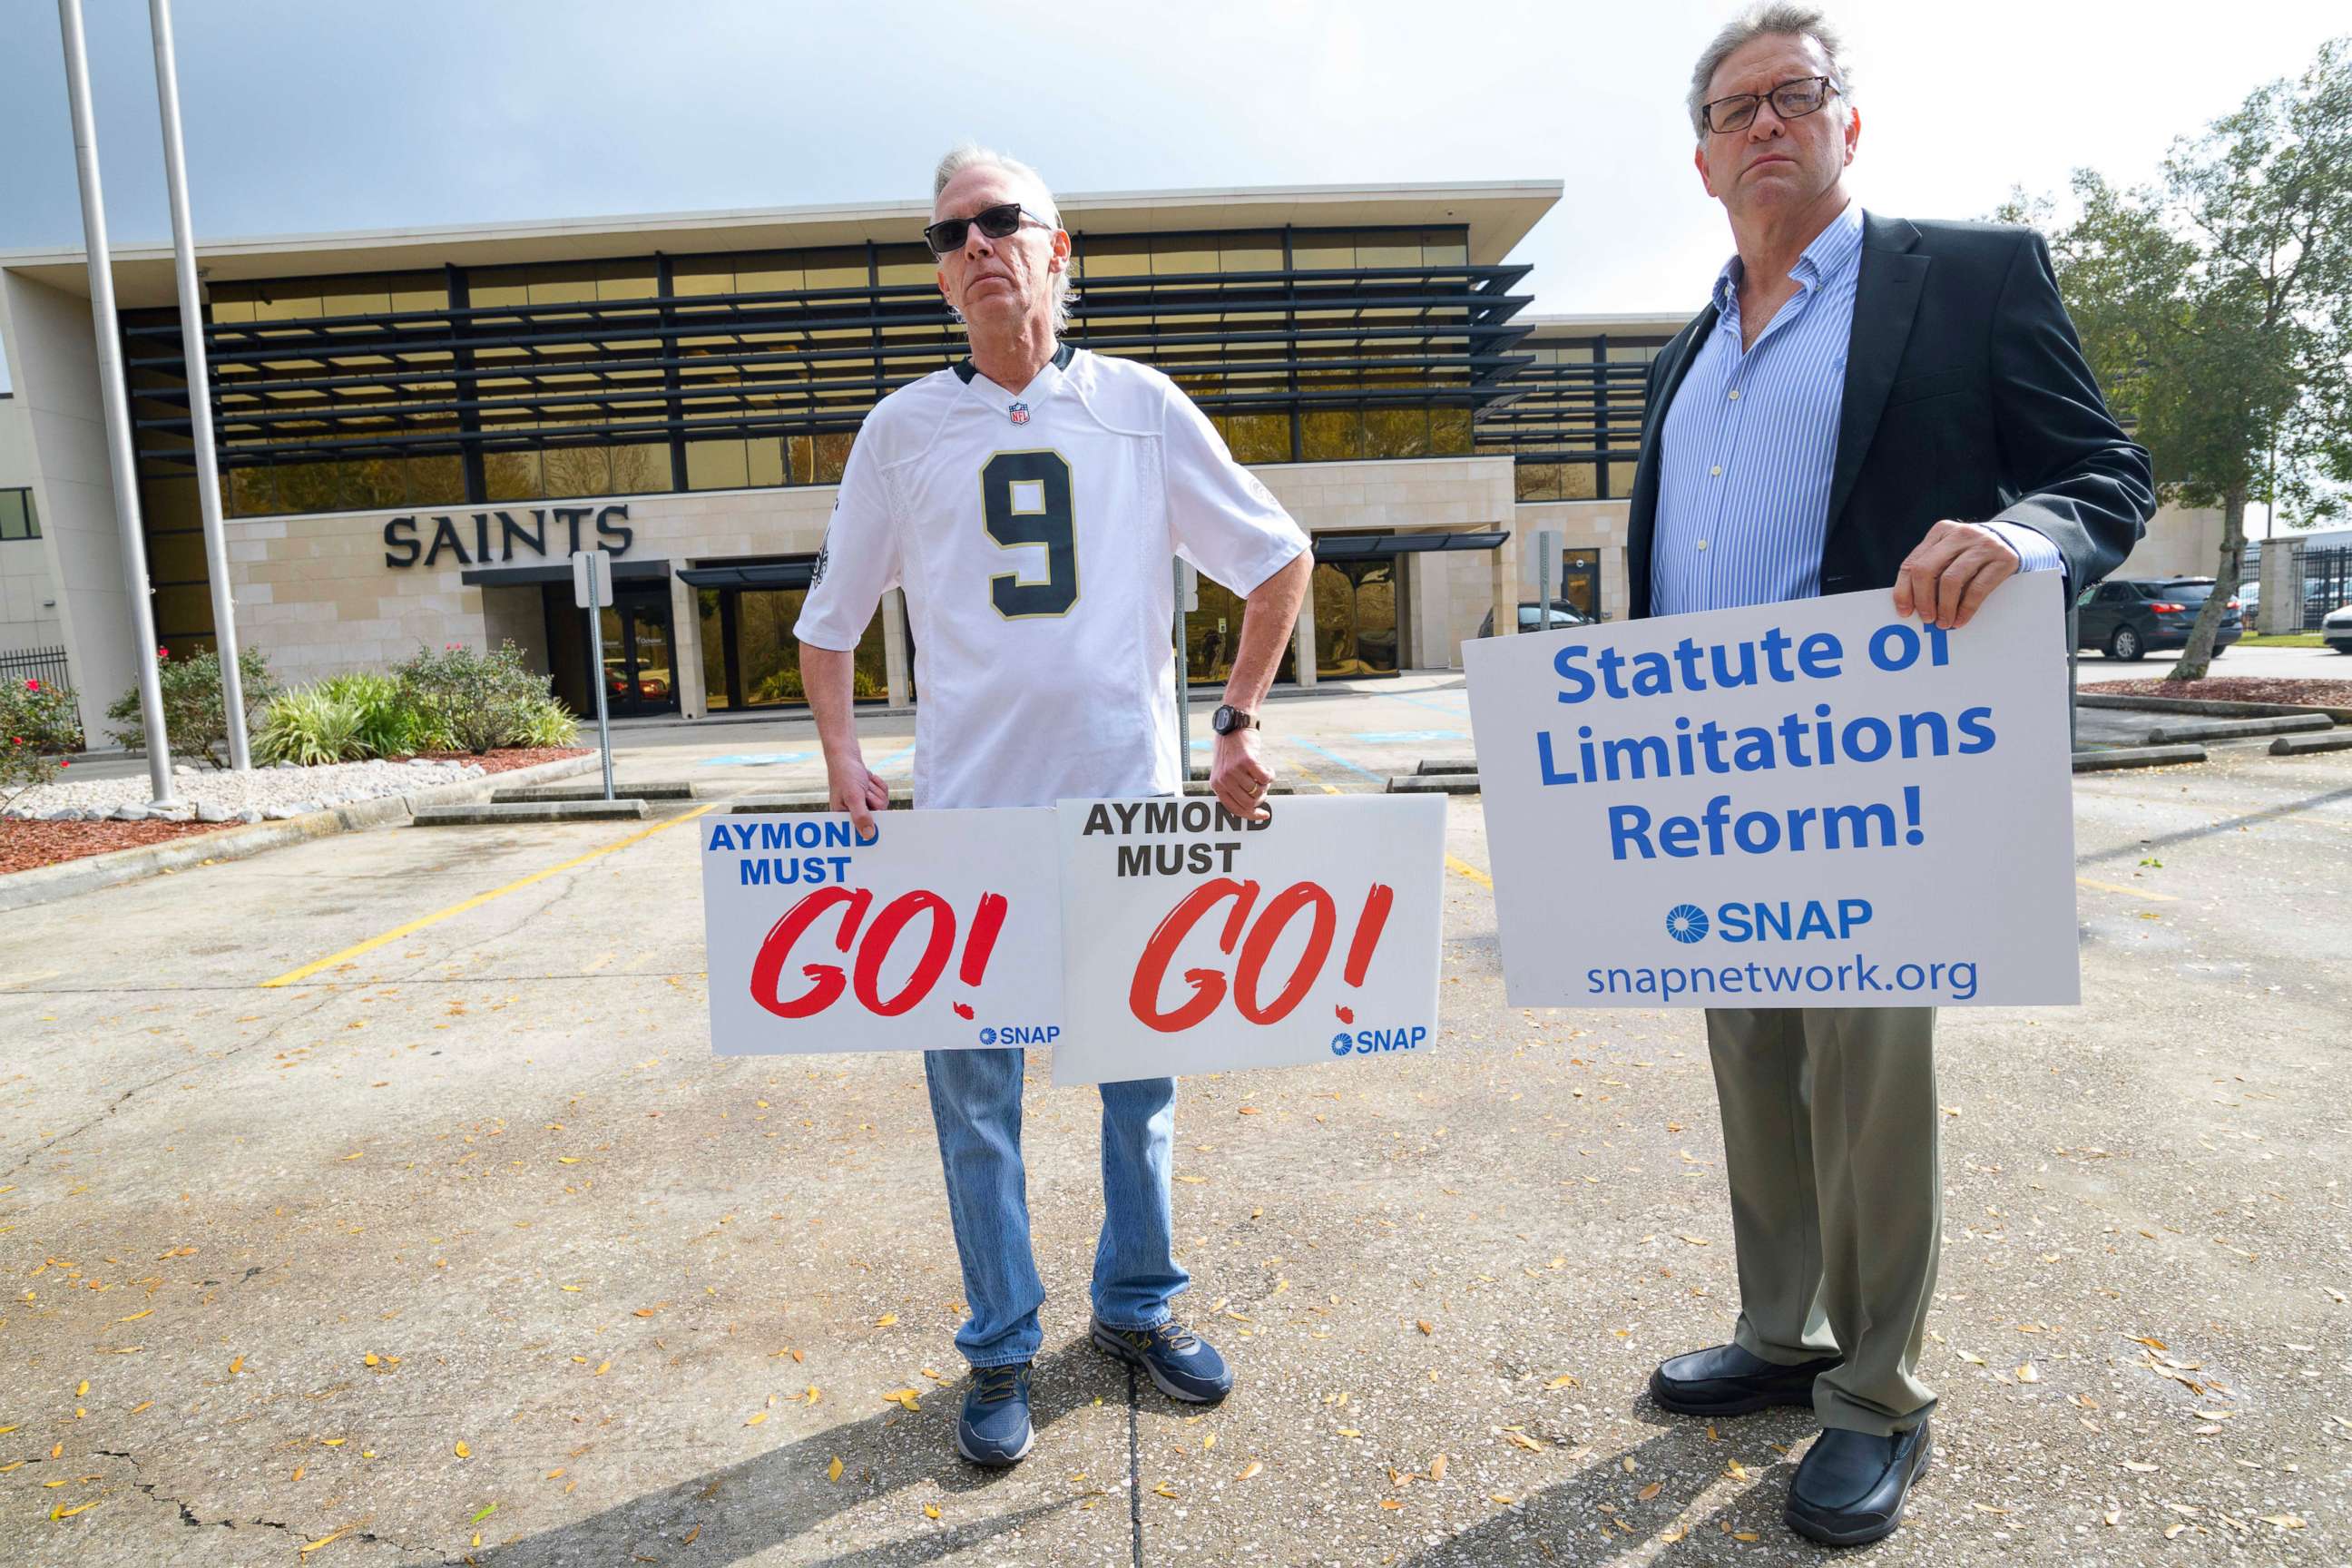 PHOTO: Richard Windmann, left, and John Gianoli, right, members of the Survivors Network of those Abused by Priests (SNAP), hold signs during a conference in front of the New Orleans Saints training facility in Metairie, La., Jan. 29, 2020.